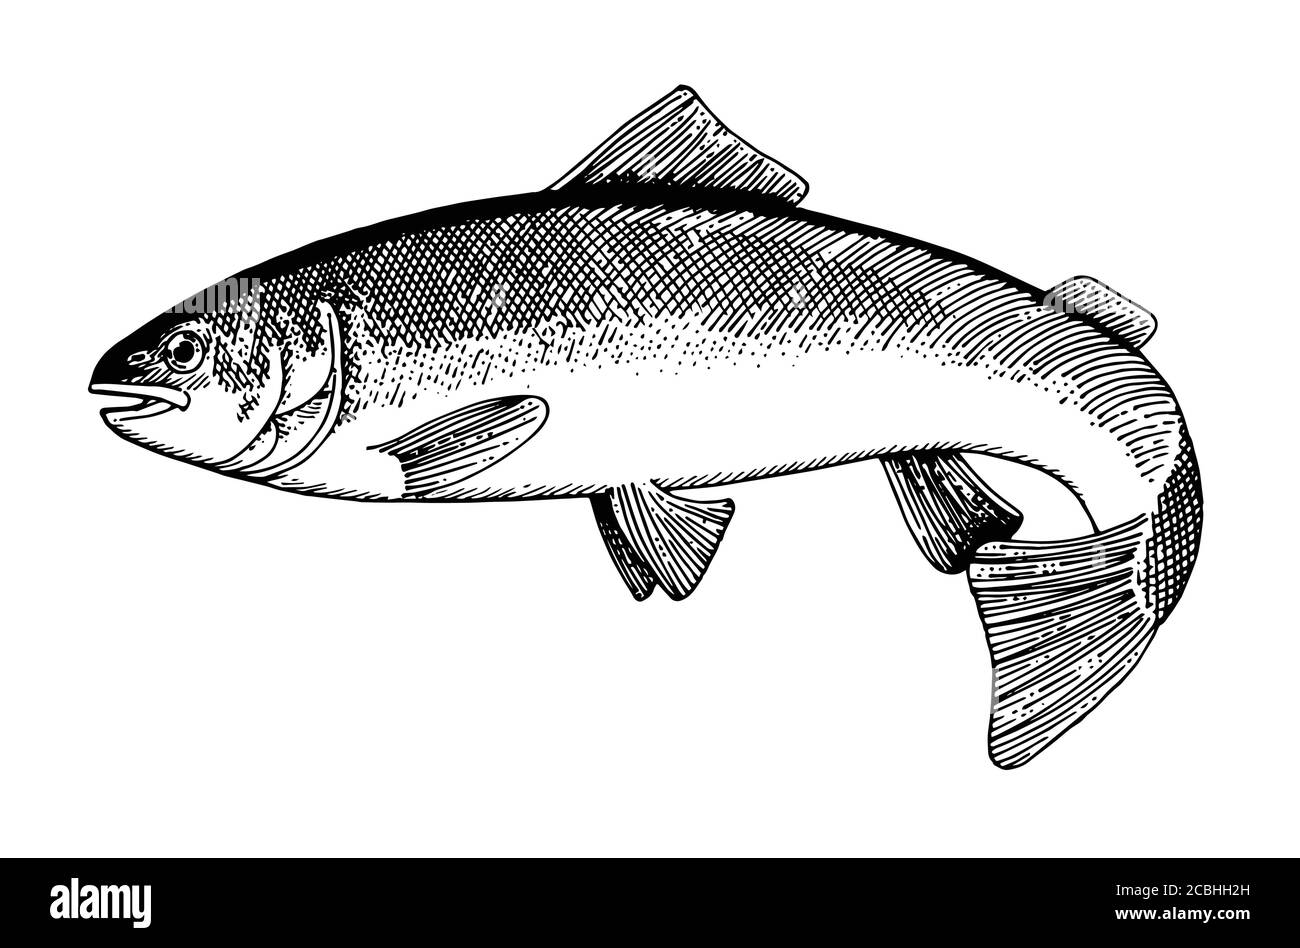 Drawing fish Black and White Stock Photos & Images - Alamy